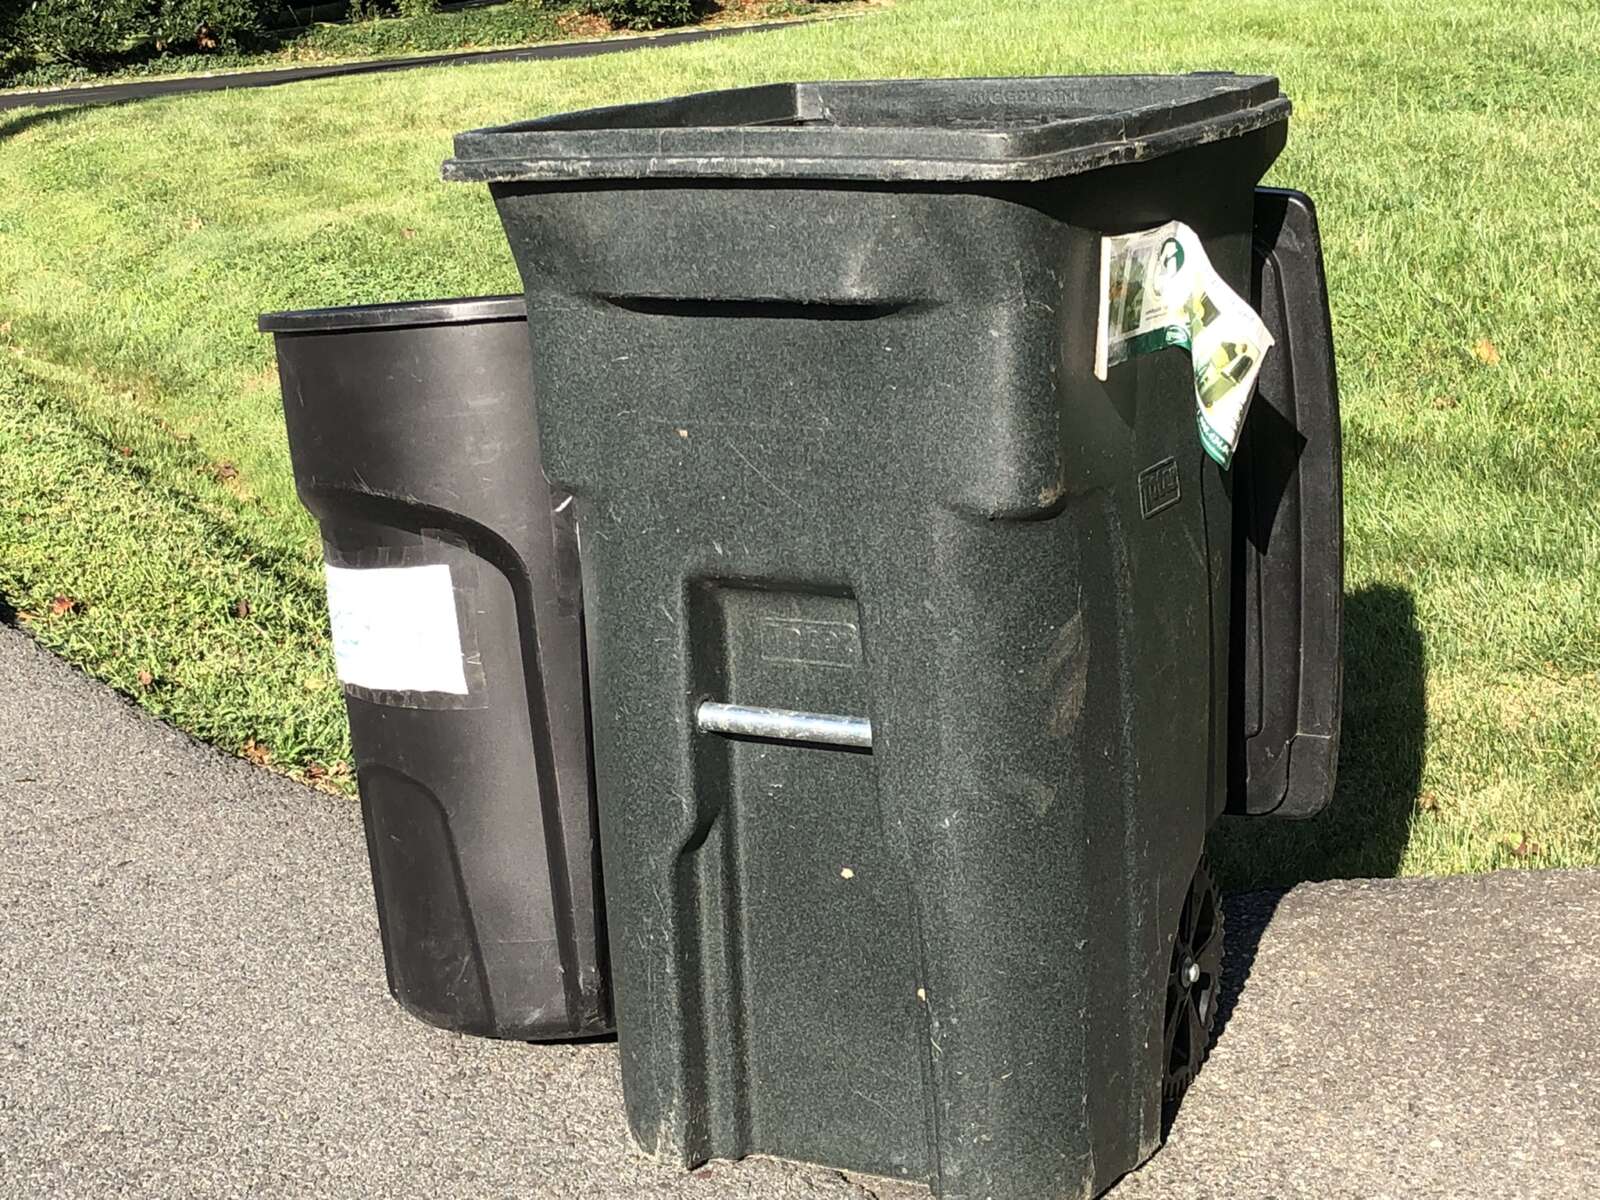 Trash troubles pile up with the county out of trash cans until